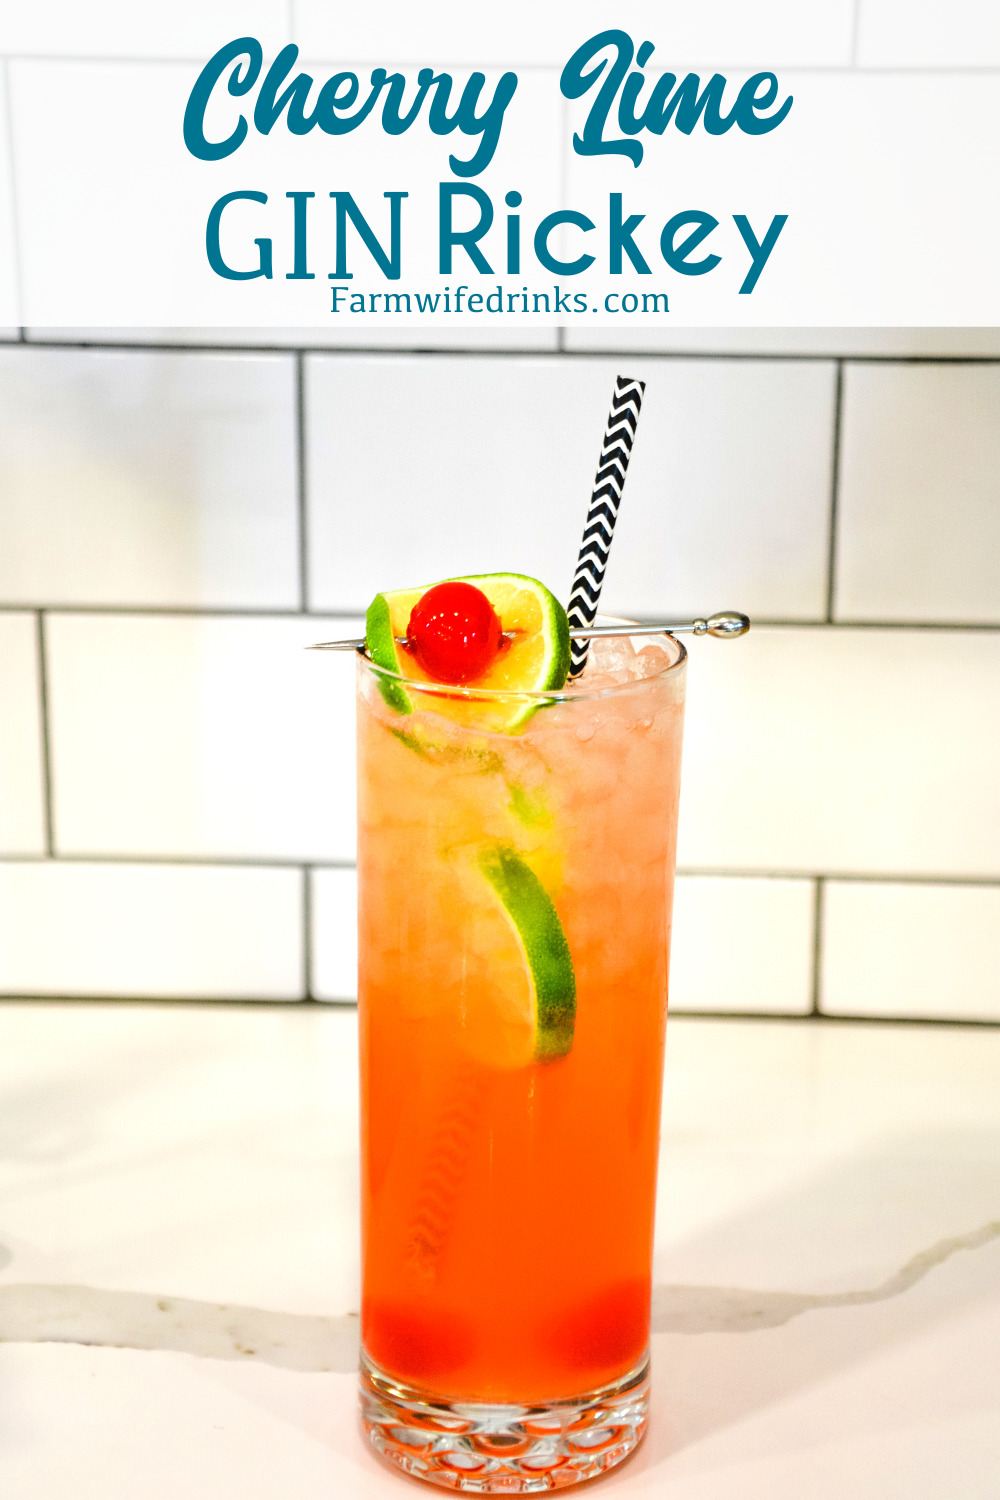 Cherry lime gin rickey cocktail is a sweeter version of the traditional gin rickey combining soda water, gin, lime juice with cherries and cherry juice.